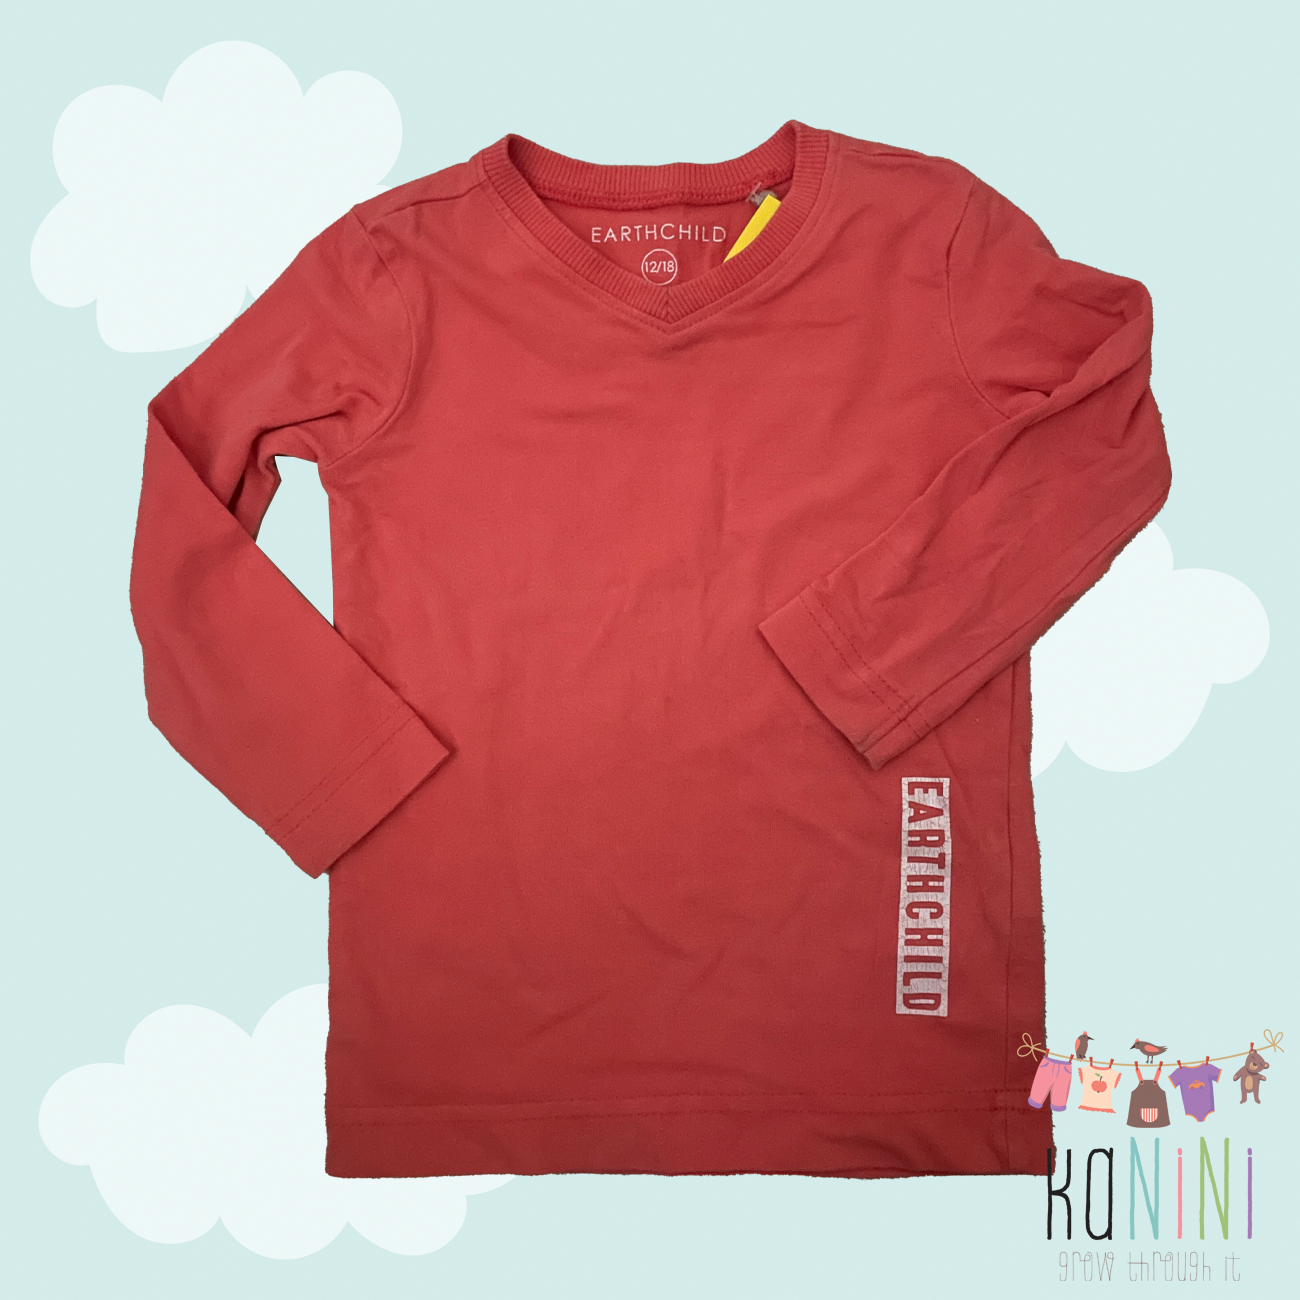 Featured image for “Earthchild 12 - 18 Months Boys Long Sleeve T-Shirt”